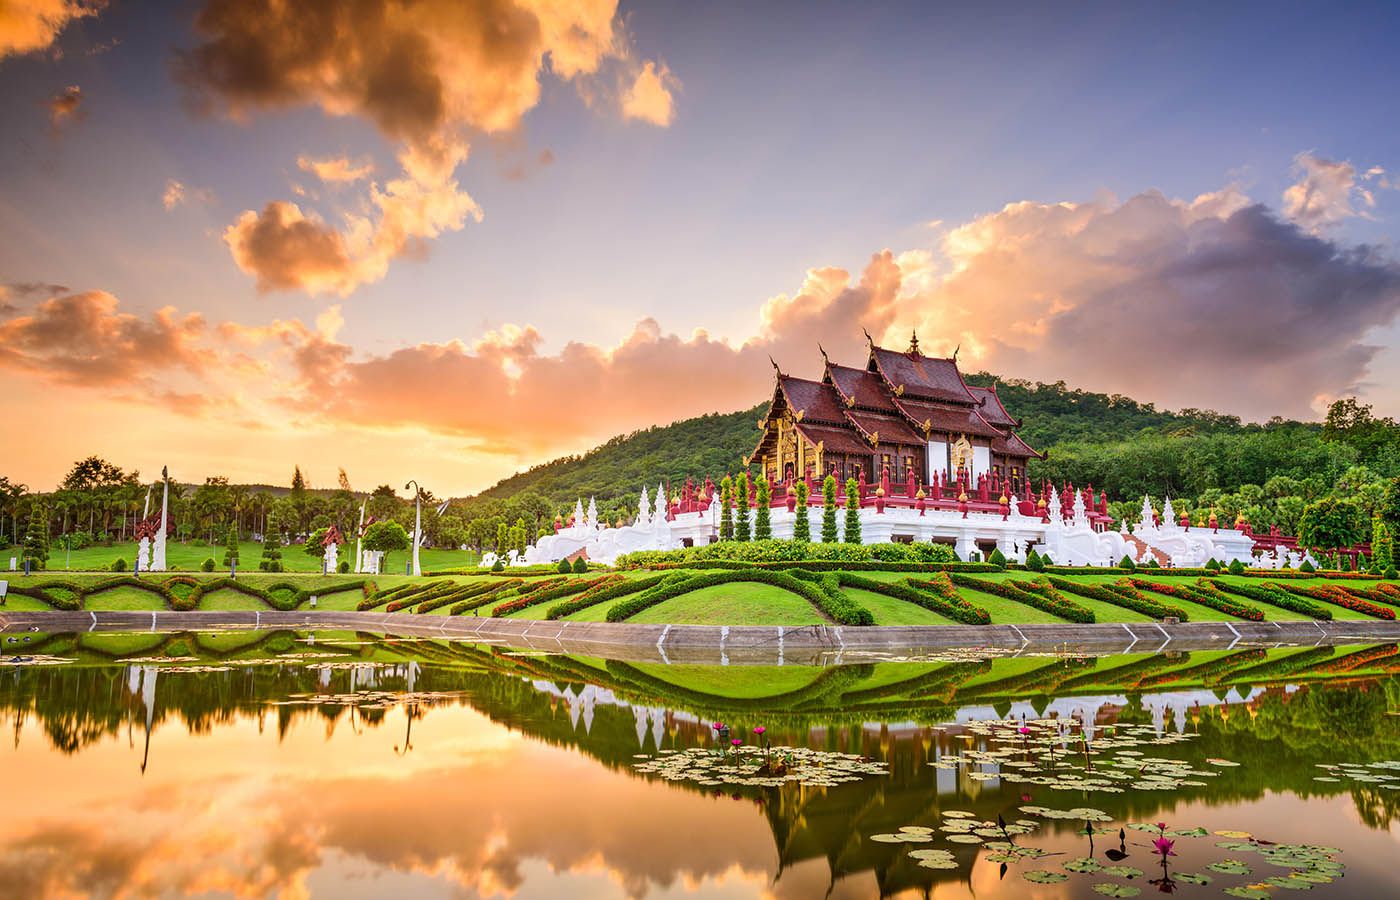 Chiang Mai, a pretty little town in Northern Thailand